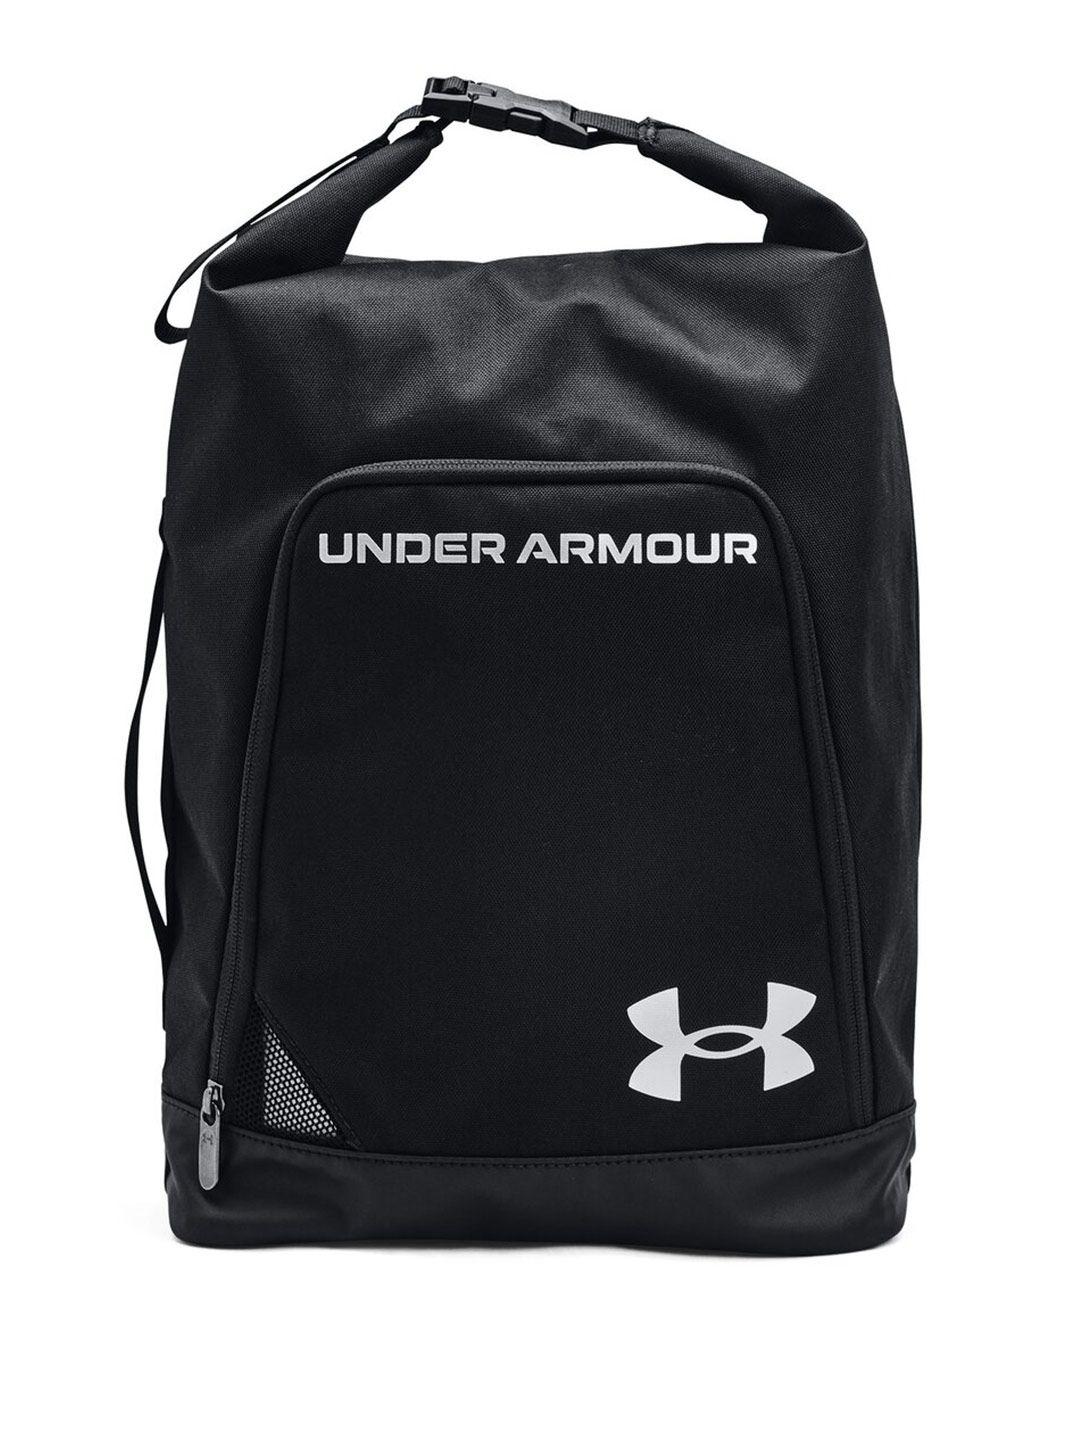 under-armour-contain-shoe-bag-backpacks